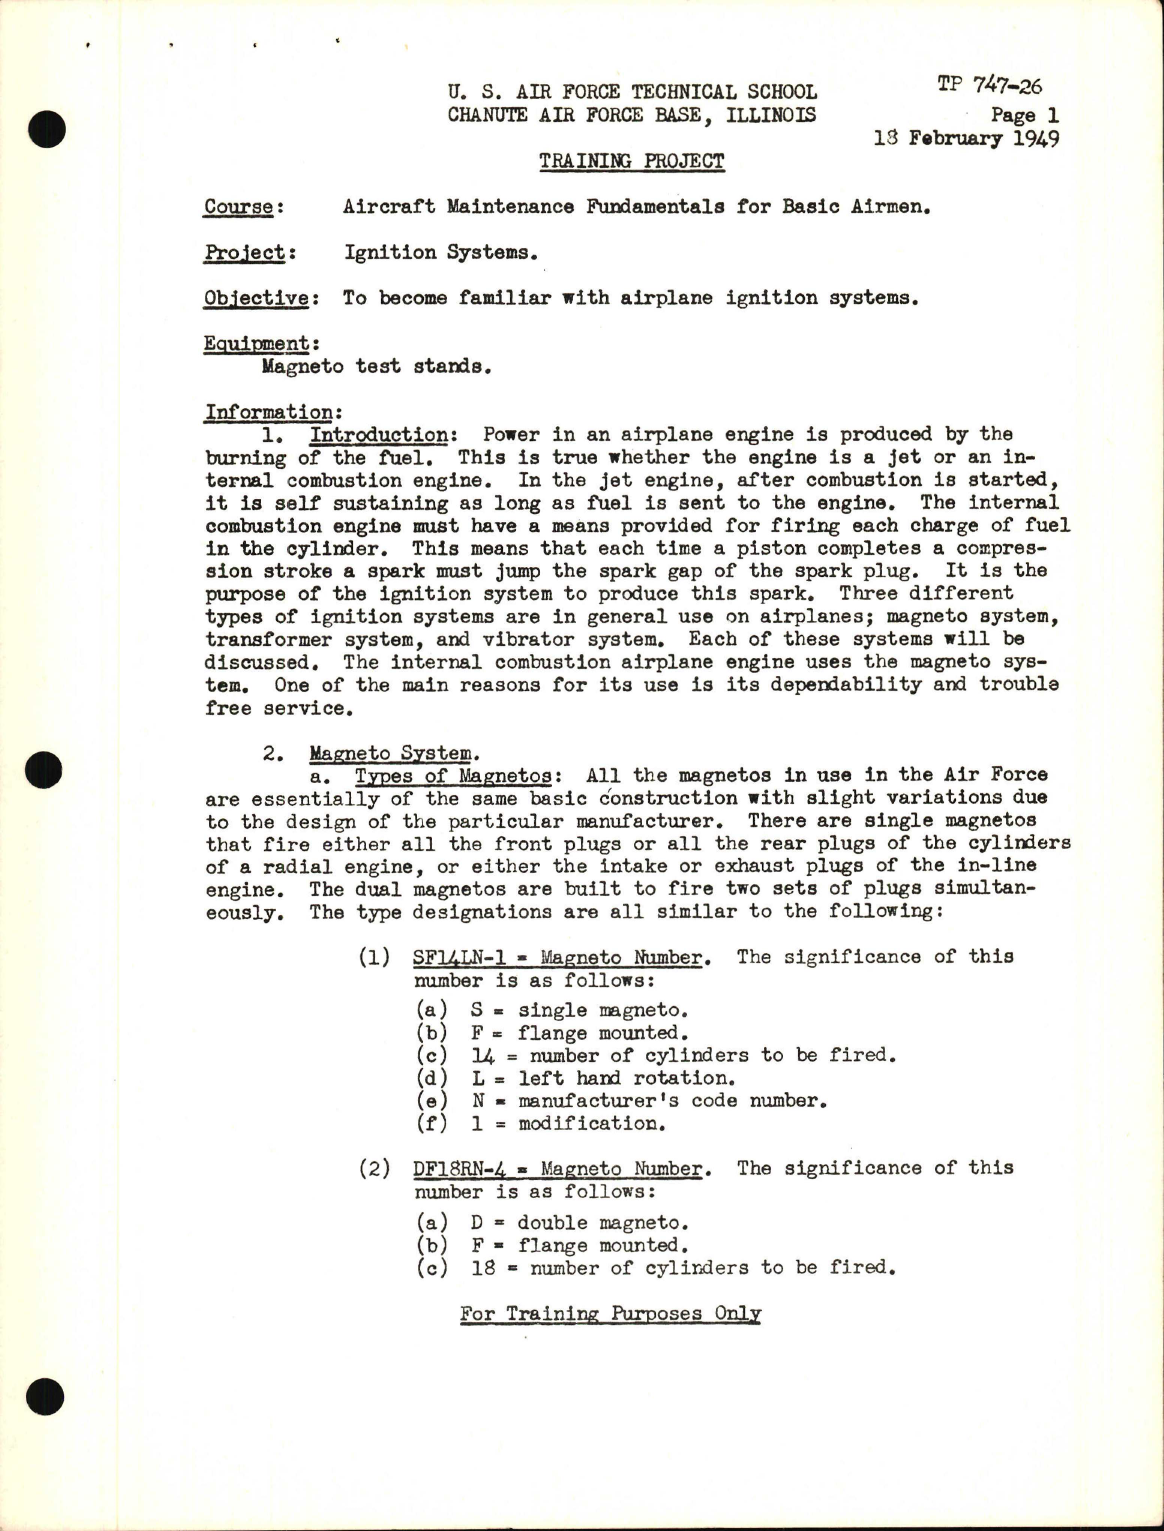 Sample page 1 from AirCorps Library document: Training Project, Ignition Systems